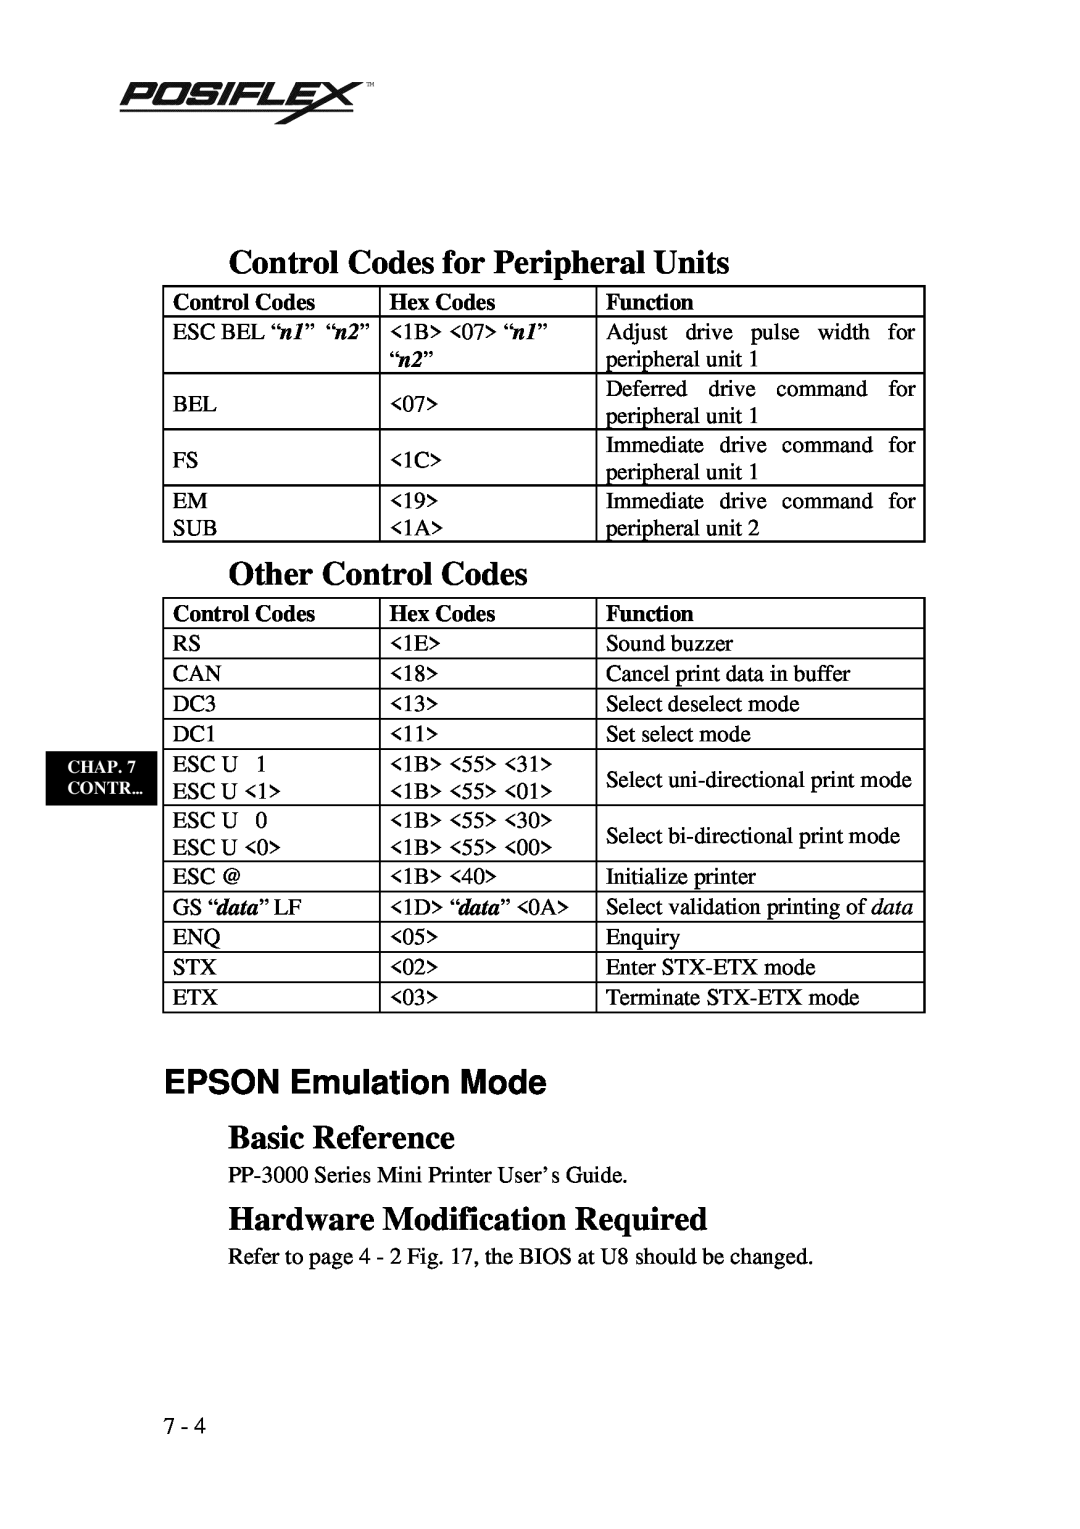 POSIFLEX Business Machines PP3000 Control Codes for Peripheral Units, Other Control Codes, EPSON Emulation Mode, Hex Codes 